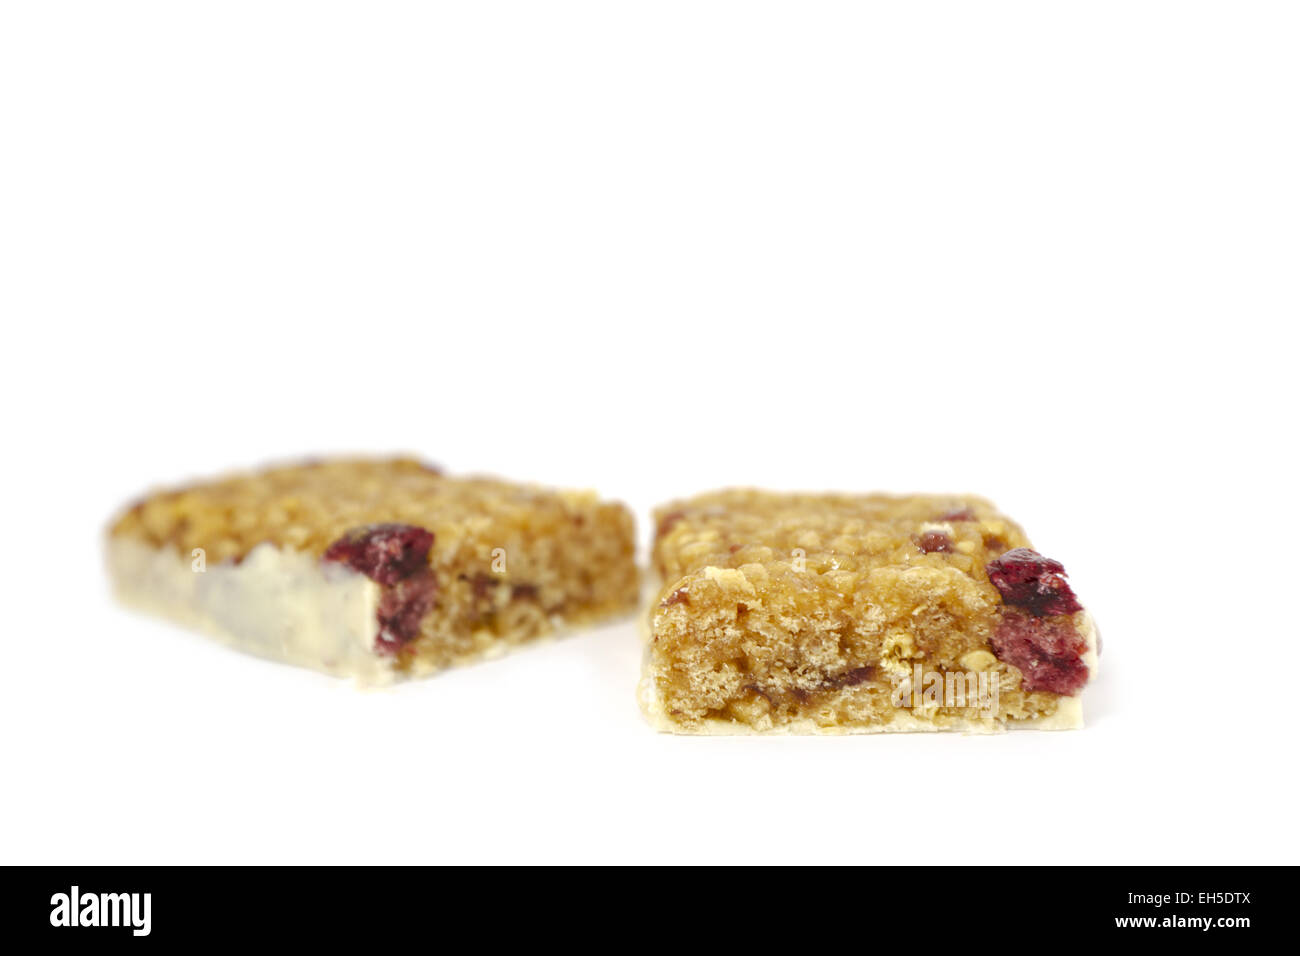 Raw Low carbohydrate bar with cranberries on white background. Stock Photo